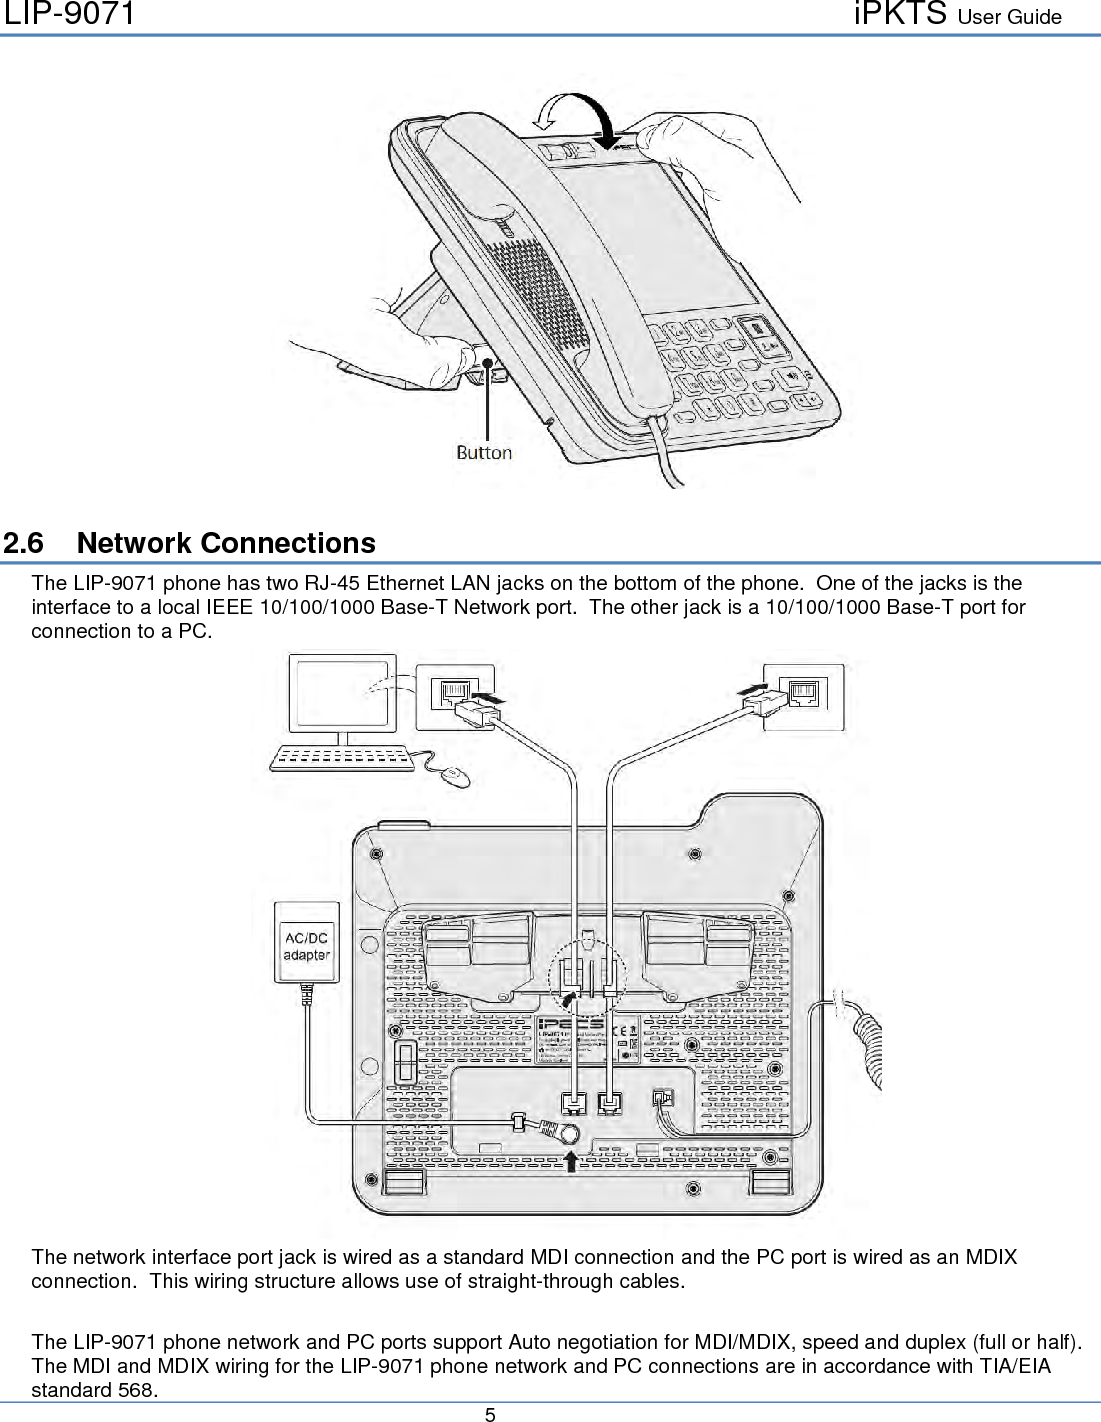 LIP-9071     iPKTS User Guide      5     2.6 Network Connections The LIP-9071 phone has two RJ-45 Ethernet LAN jacks on the bottom of the phone.  One of the jacks is the interface to a local IEEE 10/100/1000 Base-T Network port.  The other jack is a 10/100/1000 Base-T port for connection to a PC.  The network interface port jack is wired as a standard MDI connection and the PC port is wired as an MDIX connection.  This wiring structure allows use of straight-through cables.  The LIP-9071 phone network and PC ports support Auto negotiation for MDI/MDIX, speed and duplex (full or half).  The MDI and MDIX wiring for the LIP-9071 phone network and PC connections are in accordance with TIA/EIA standard 568. 